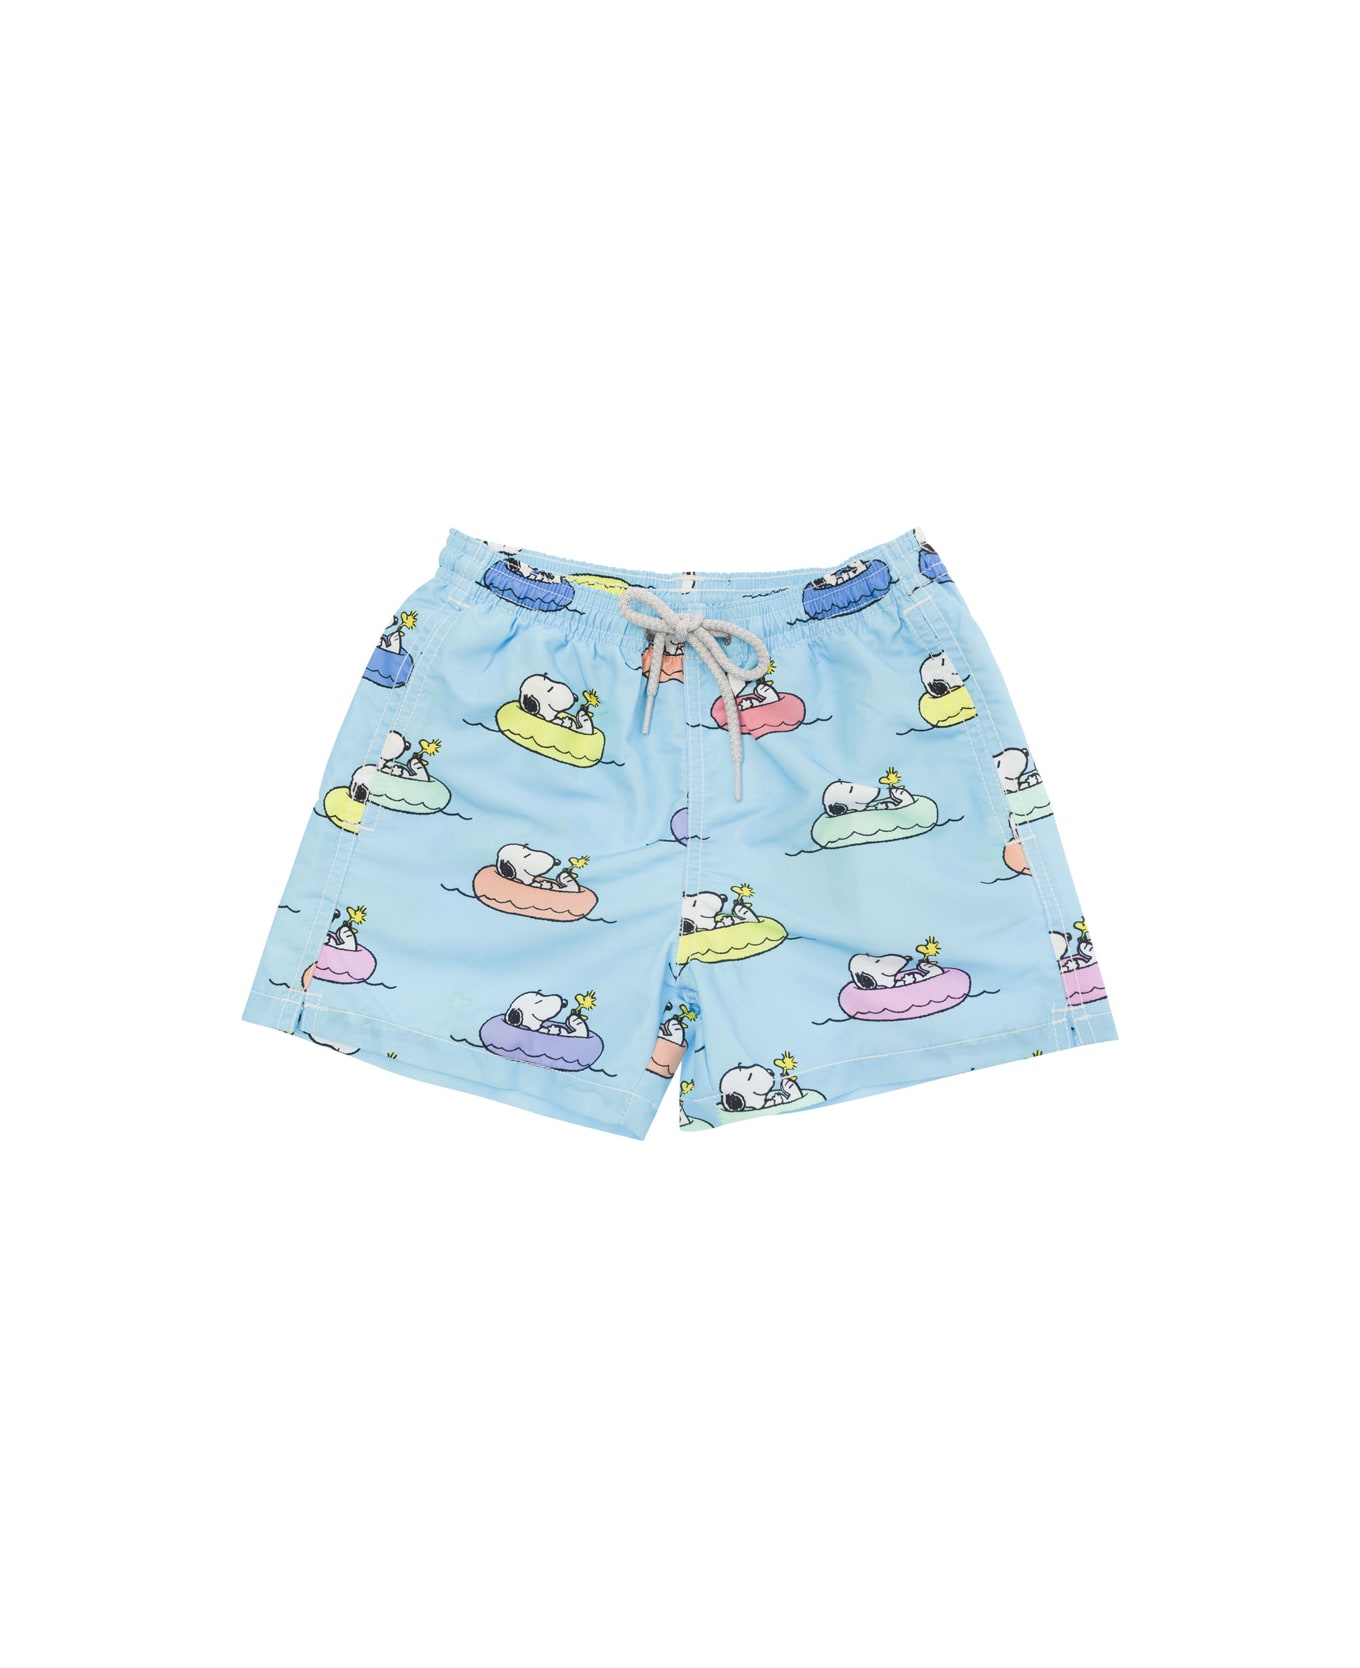 MC2 Saint Barth Multicolor Swim Shorts With All-over Snoopy Print In Fabric Baby - Light blue